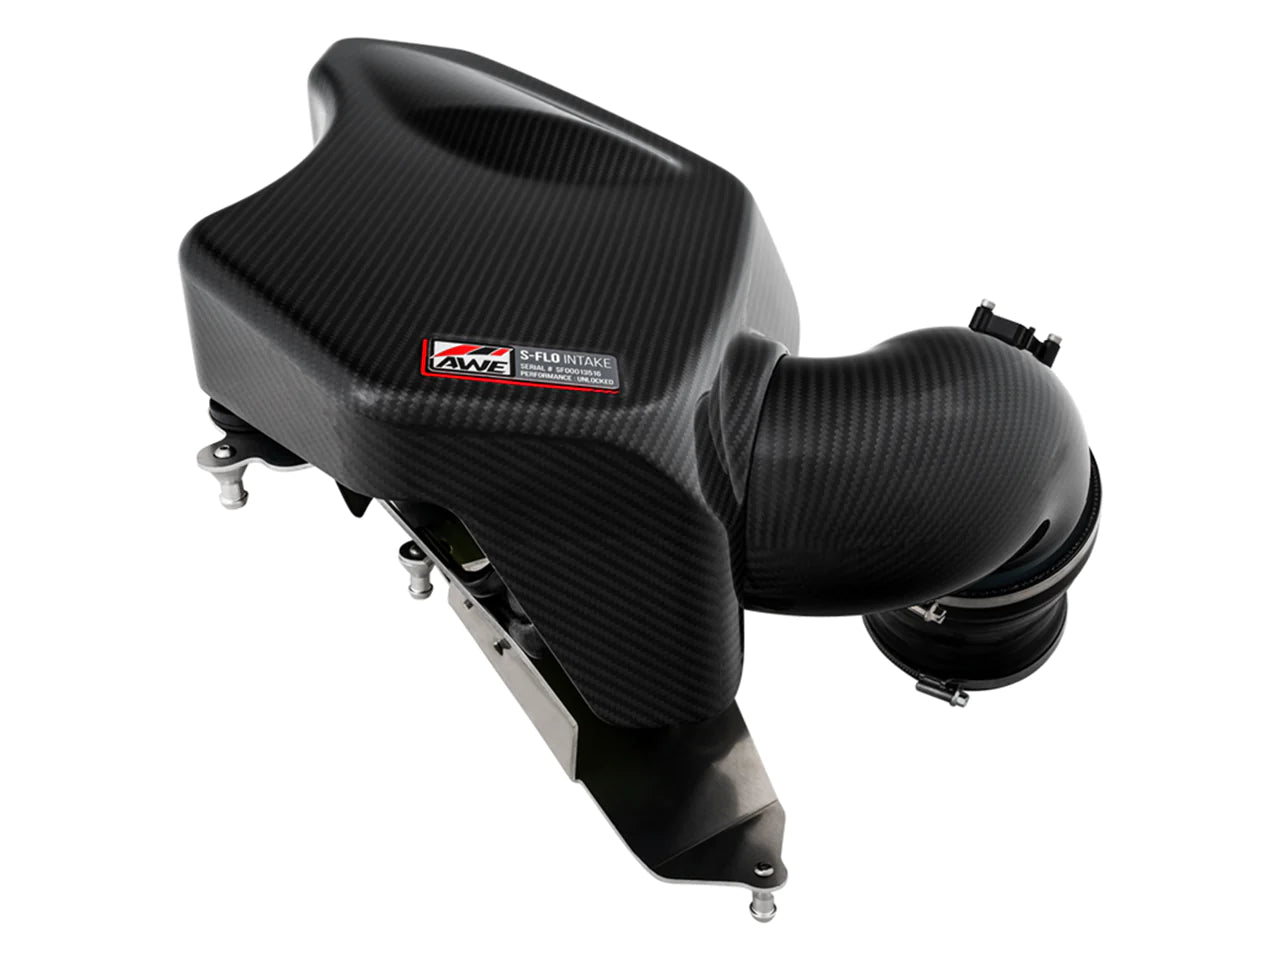 AWE Tuning Carbon Fiber Lid For S-FLO Intake - A90/A91 Supra 3.0